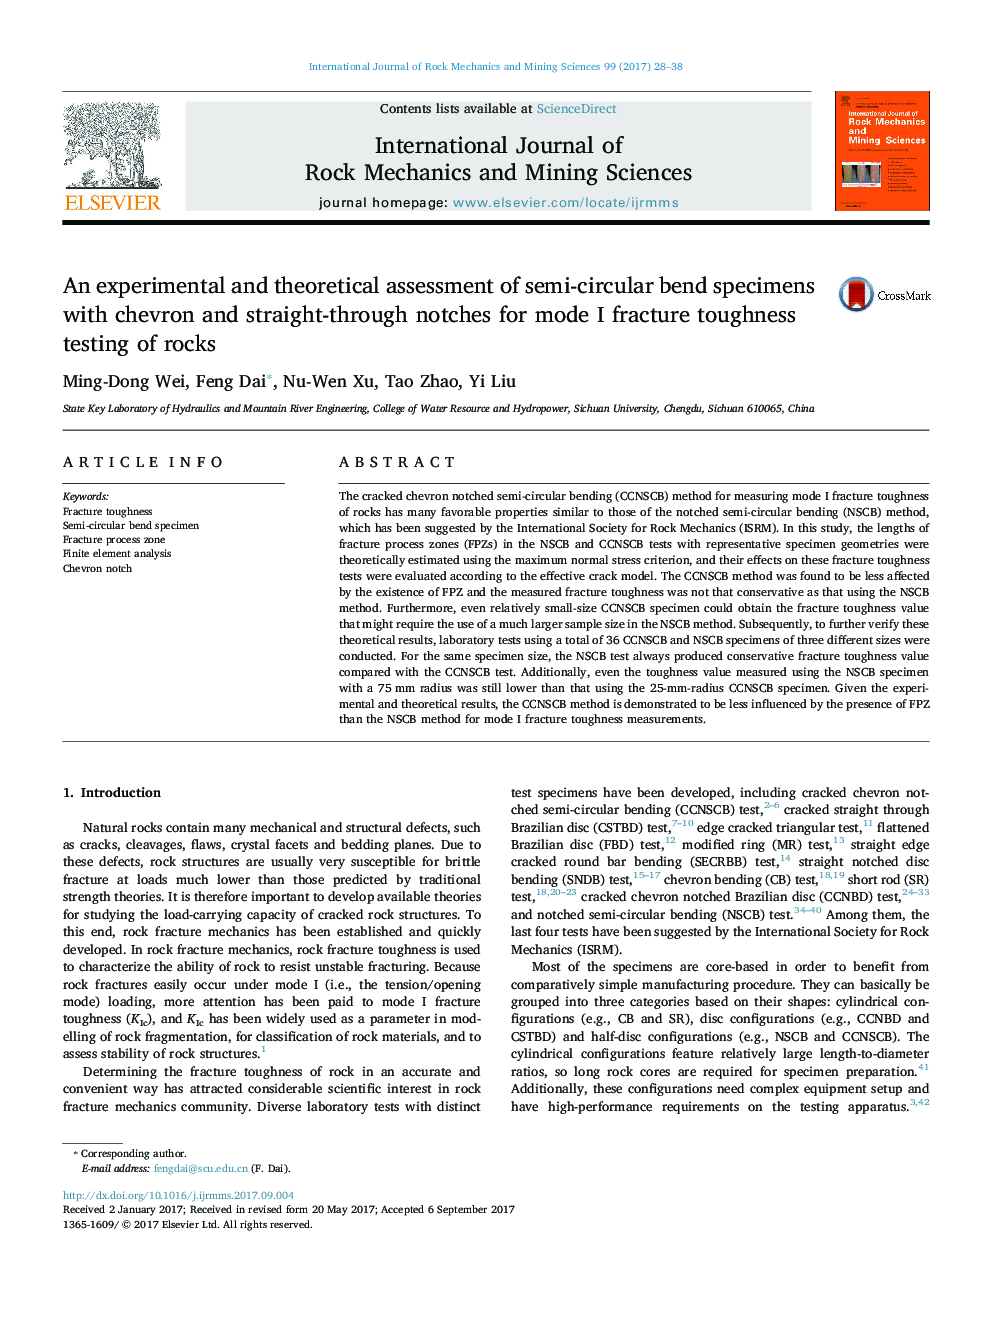 An experimental and theoretical assessment of semi-circular bend specimens with chevron and straight-through notches for mode I fracture toughness testing of rocks